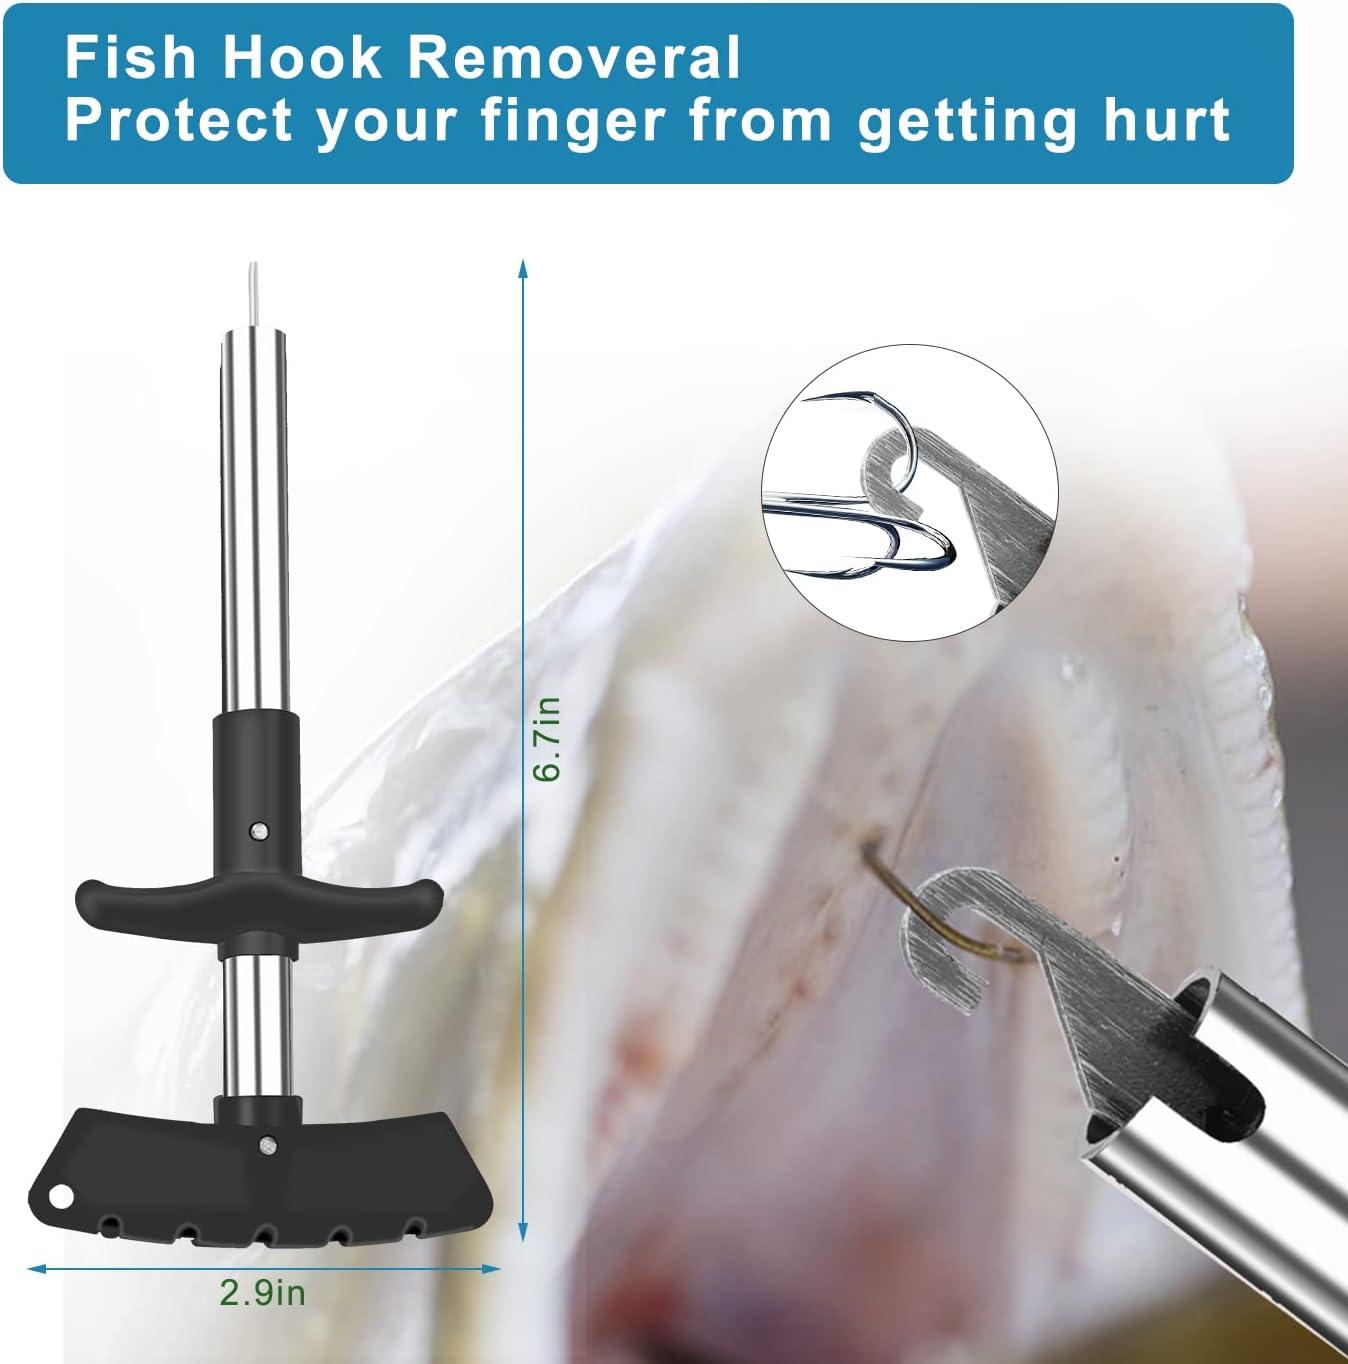 Fish Hook Remover Tools Kit Include 1 Piece Handheld Digital Fish Scale 1  Piece Fish Hook Remover Tool 1 Piece Fish Lip Gripper 1 Piece Fish Plier  with Sheath and 2 Pieces Fishing Tool Lanyards : Sports & Outdoors 